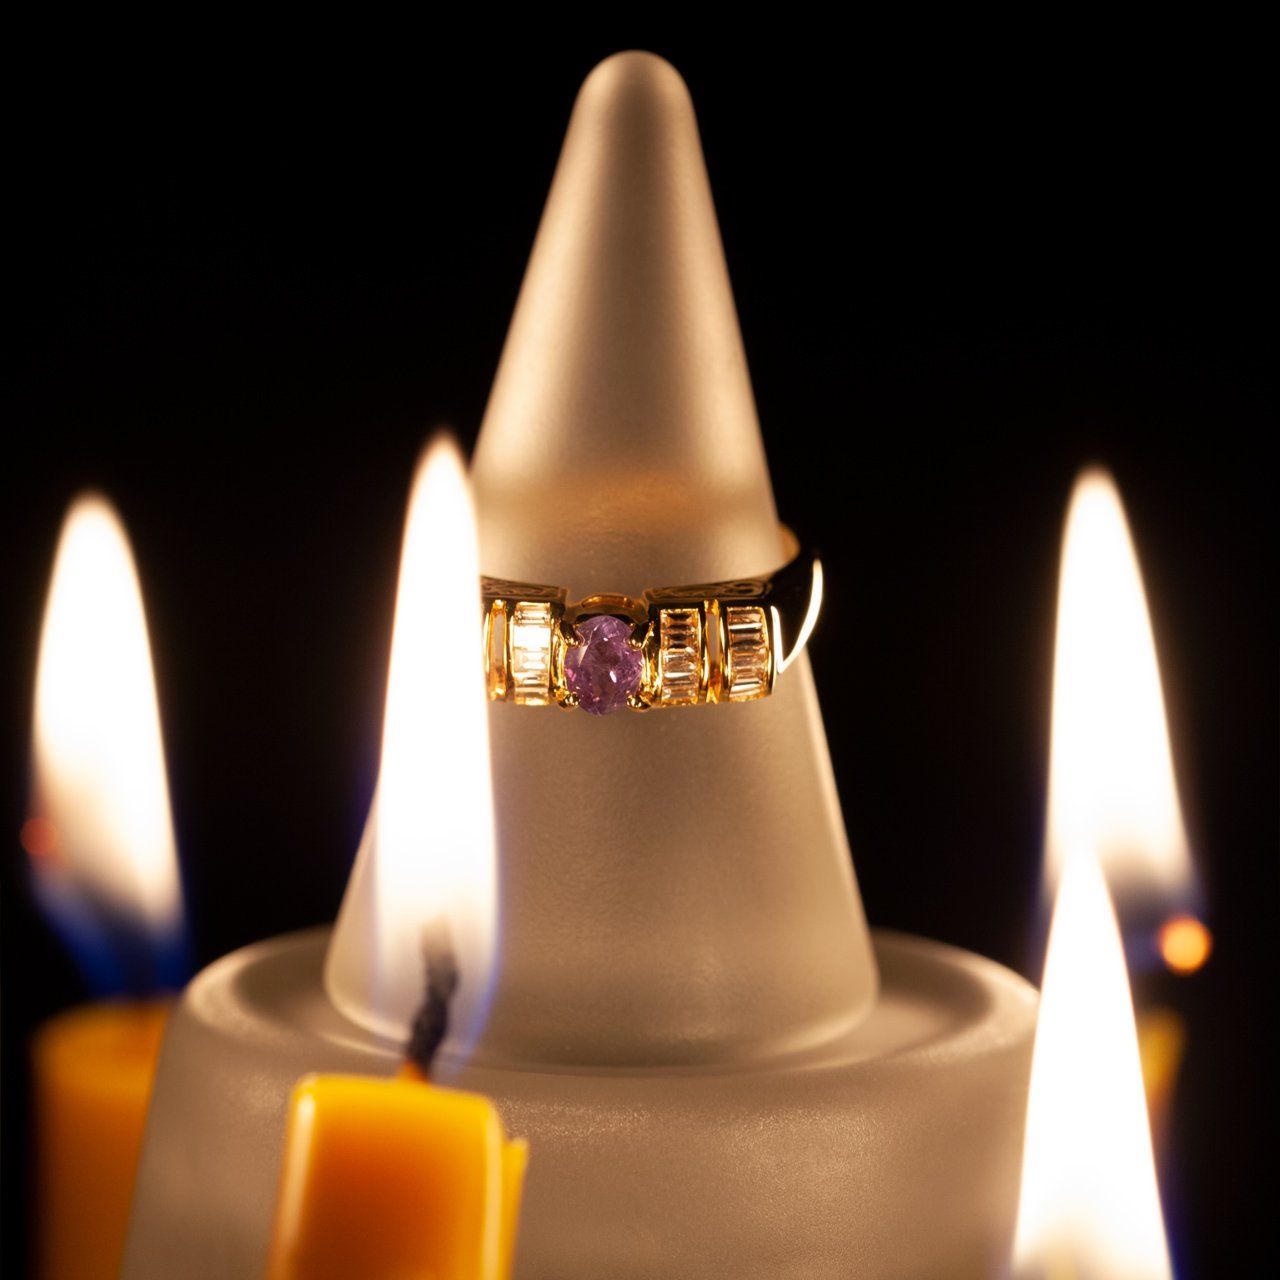 The 0.37ct alexandrite unisex ring in 18k yellow gold resting on a candle for display